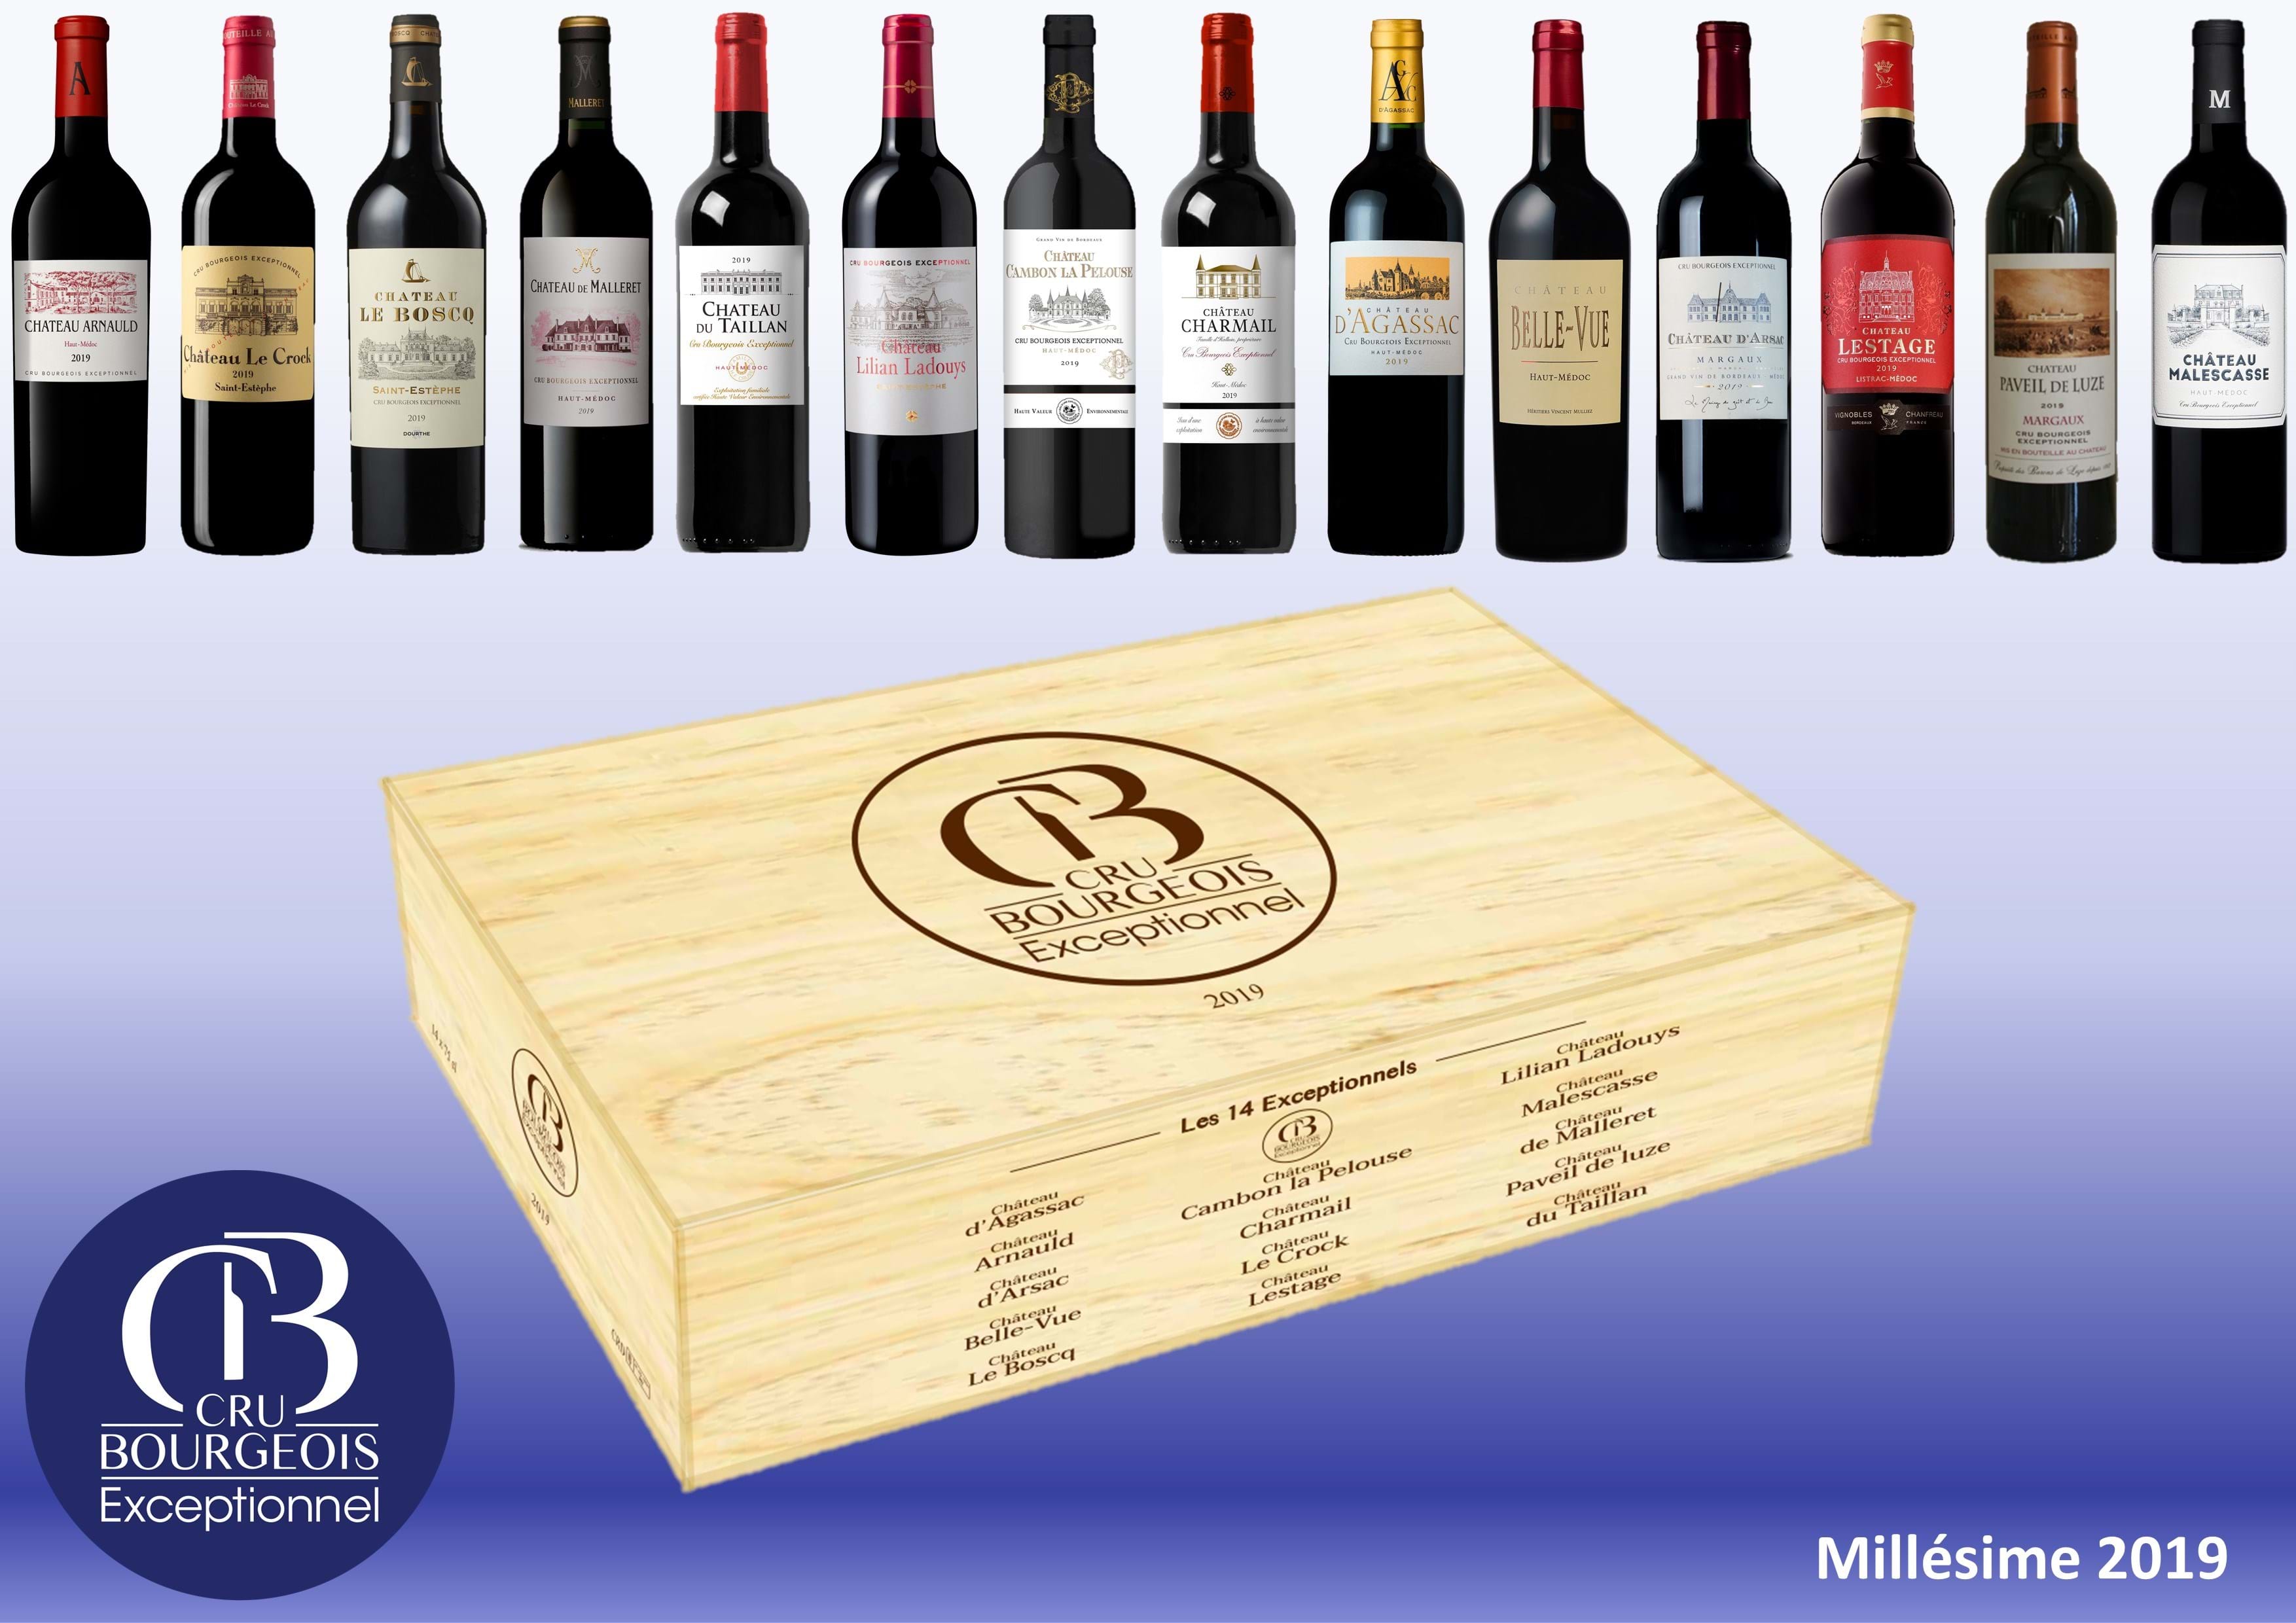 14 Crus Bourgeois Exceptionnels 2019 (14 bottles in a wooden case)